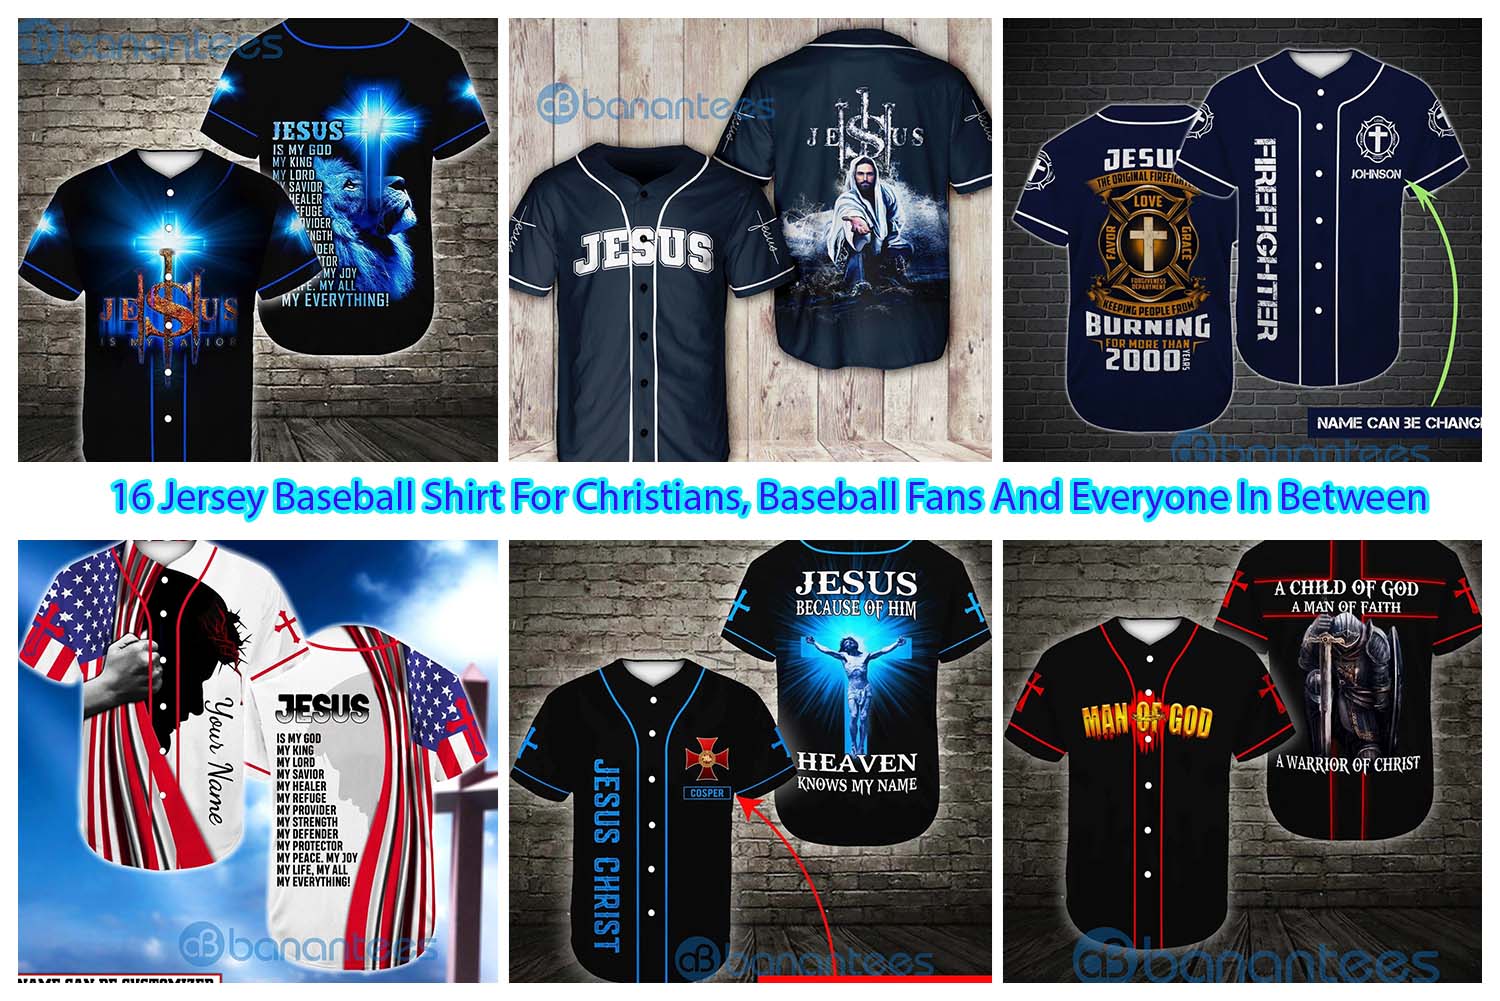 16 Jersey Baseball Shirt For Christians, Baseball Fans And Everyone In Between